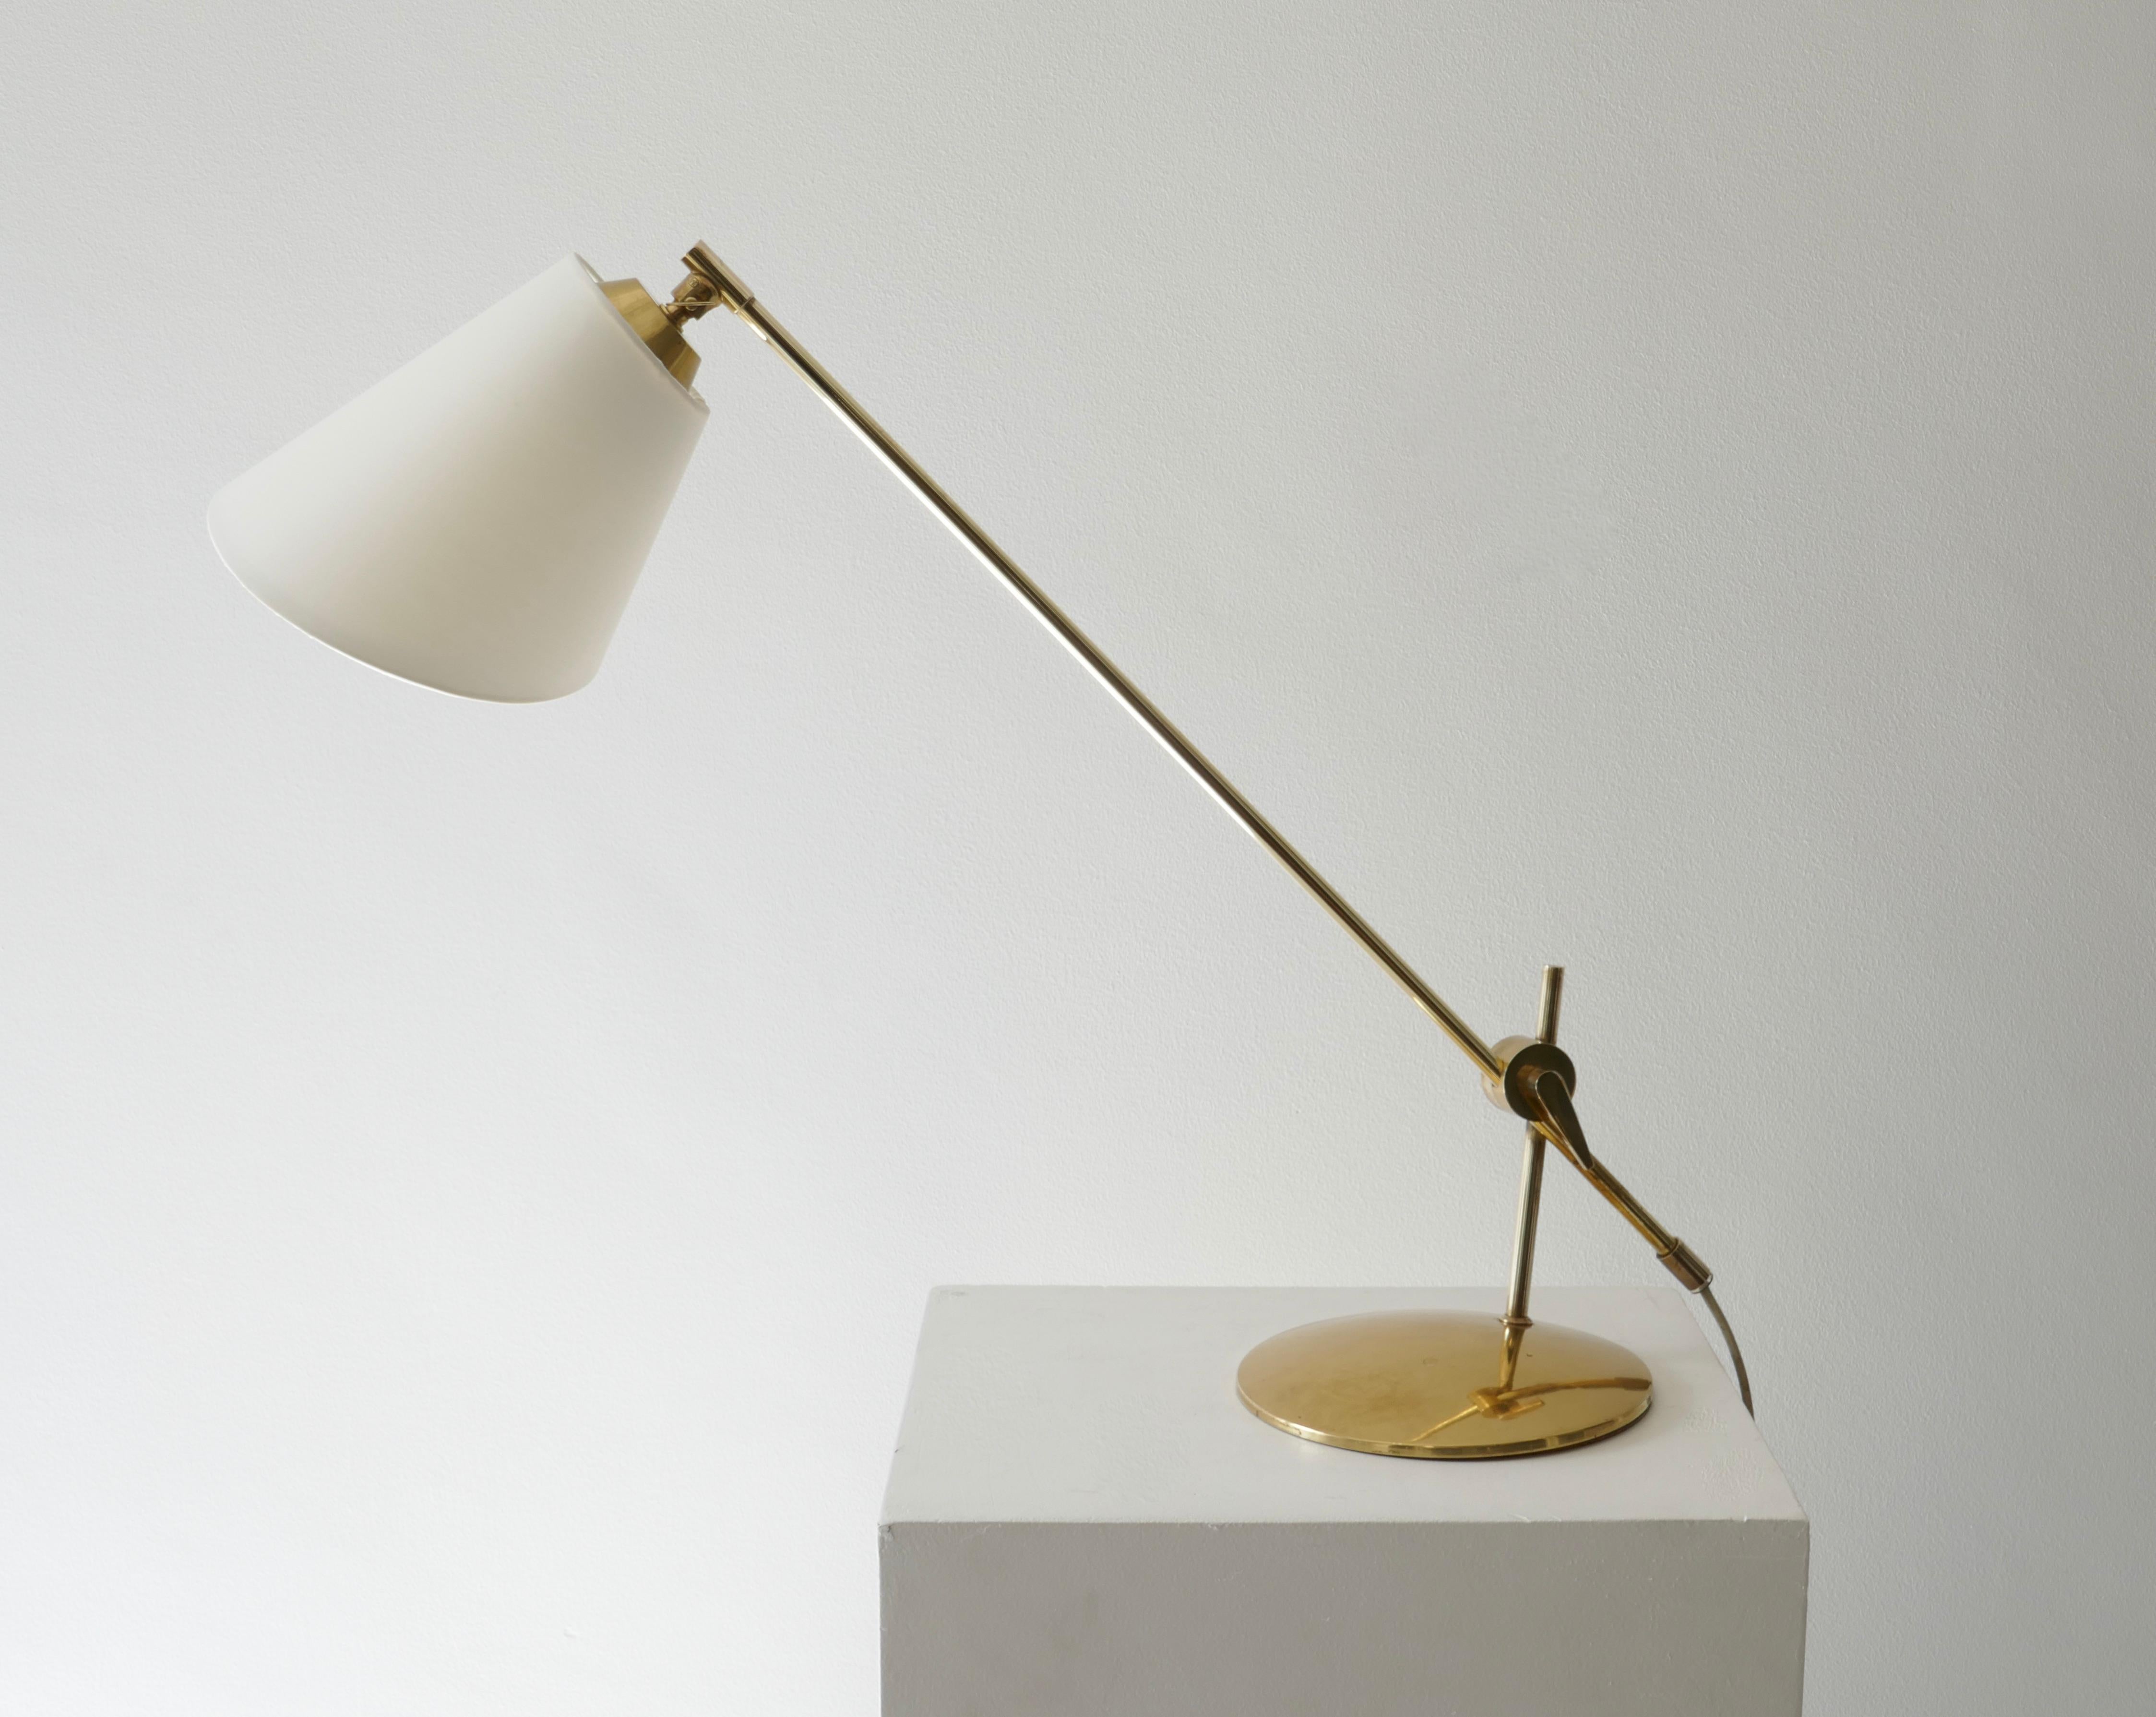 Adjustable brass table or desk lamp, attributed to Th. Valentiner for Povl Dinesen with white lamp shade, Denmark, 1960s.